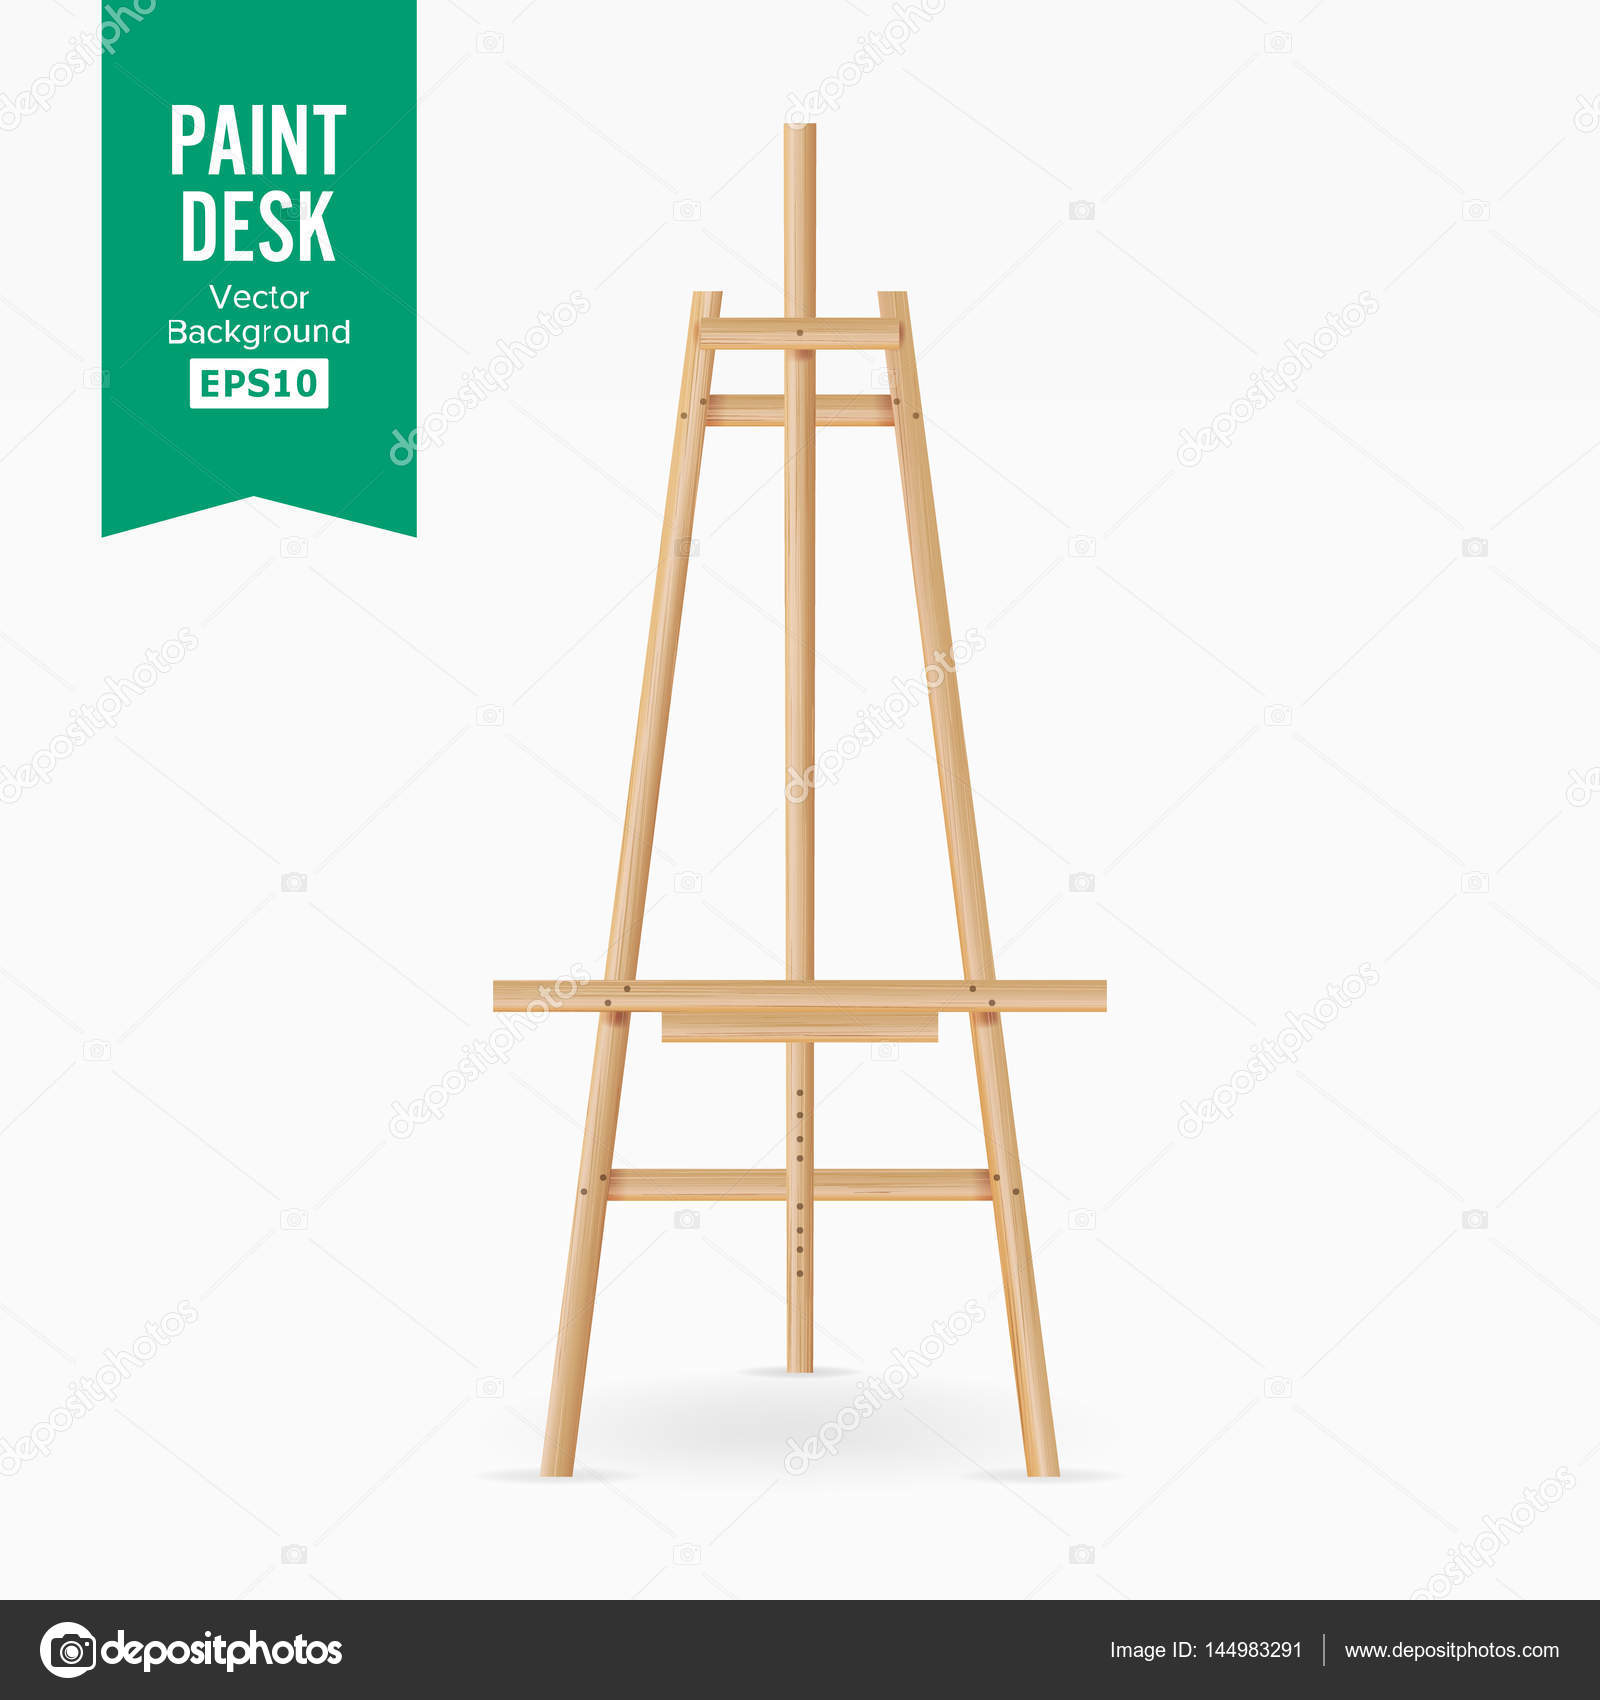 Paint desk wooden easel template Royalty Free Vector Image